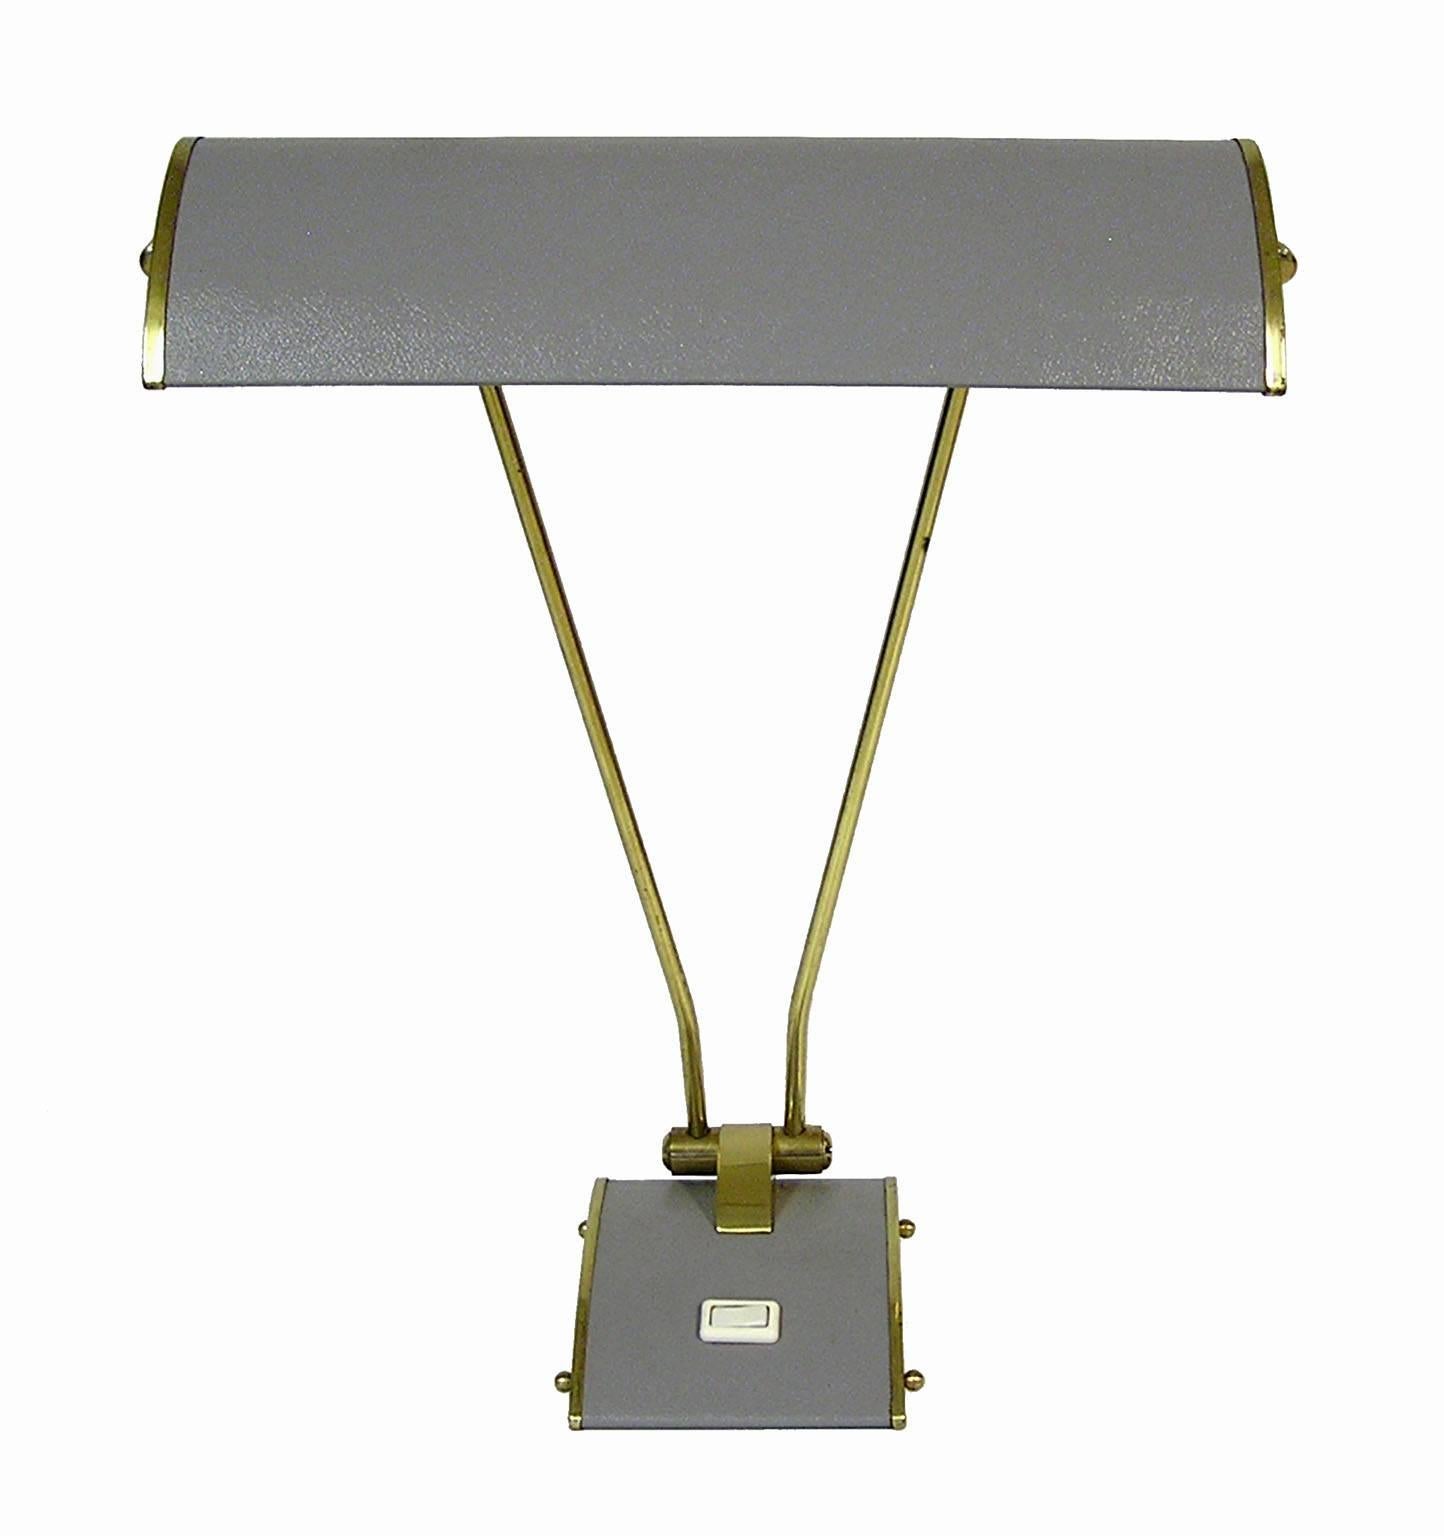 A beautiful desk lamp from the 1940s era designed by Eileen Gray for Jumo of France. Constructed out of brass and metal with and adjustable shaft and hood. Lamp is fitted with Dual light sockets and while it still has the original switch located on